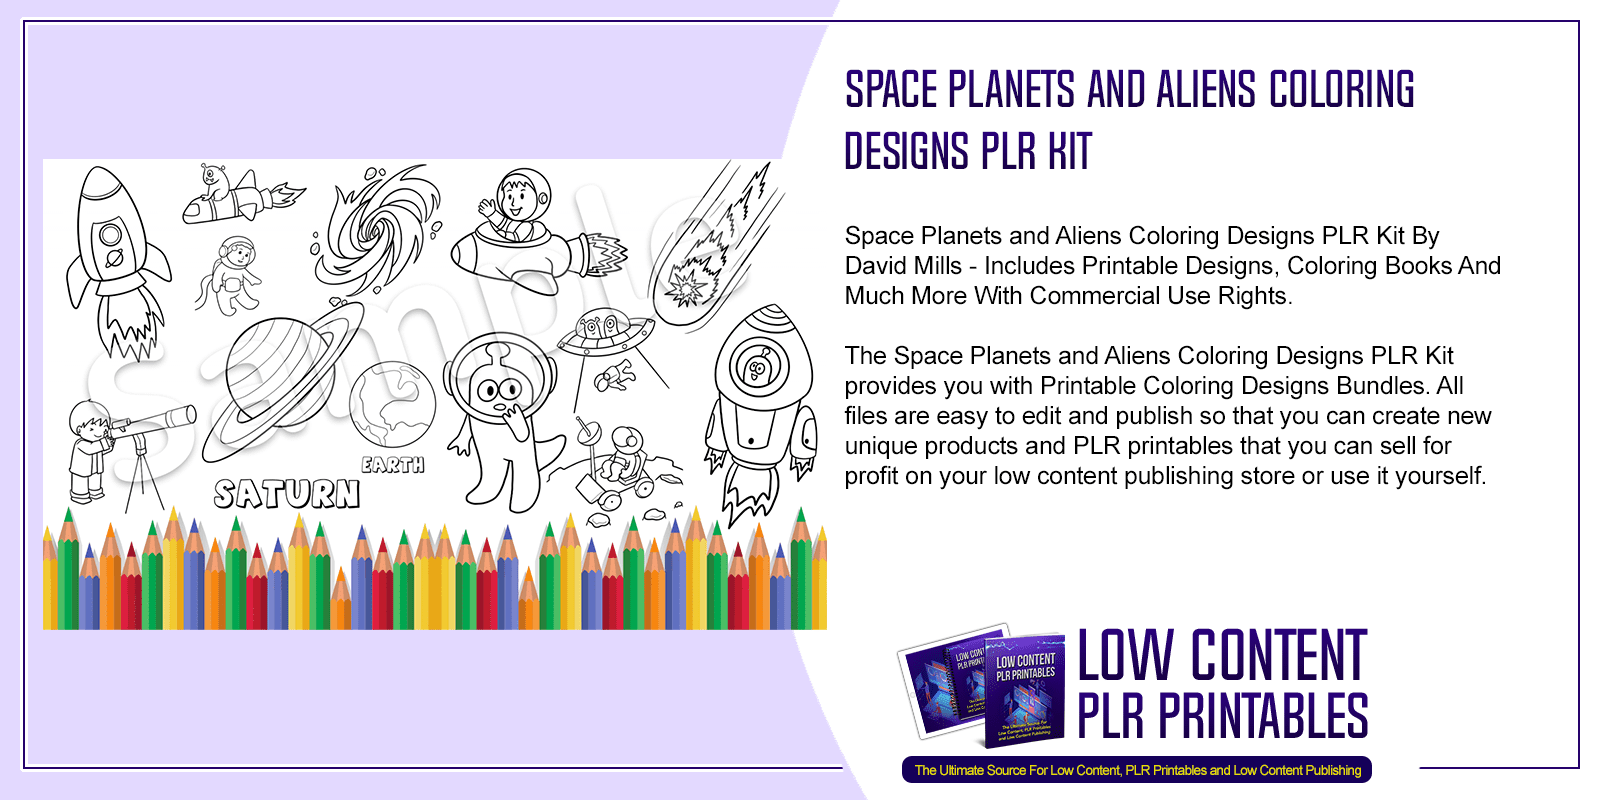 Space Planets and Aliens Coloring Designs PLR Kit